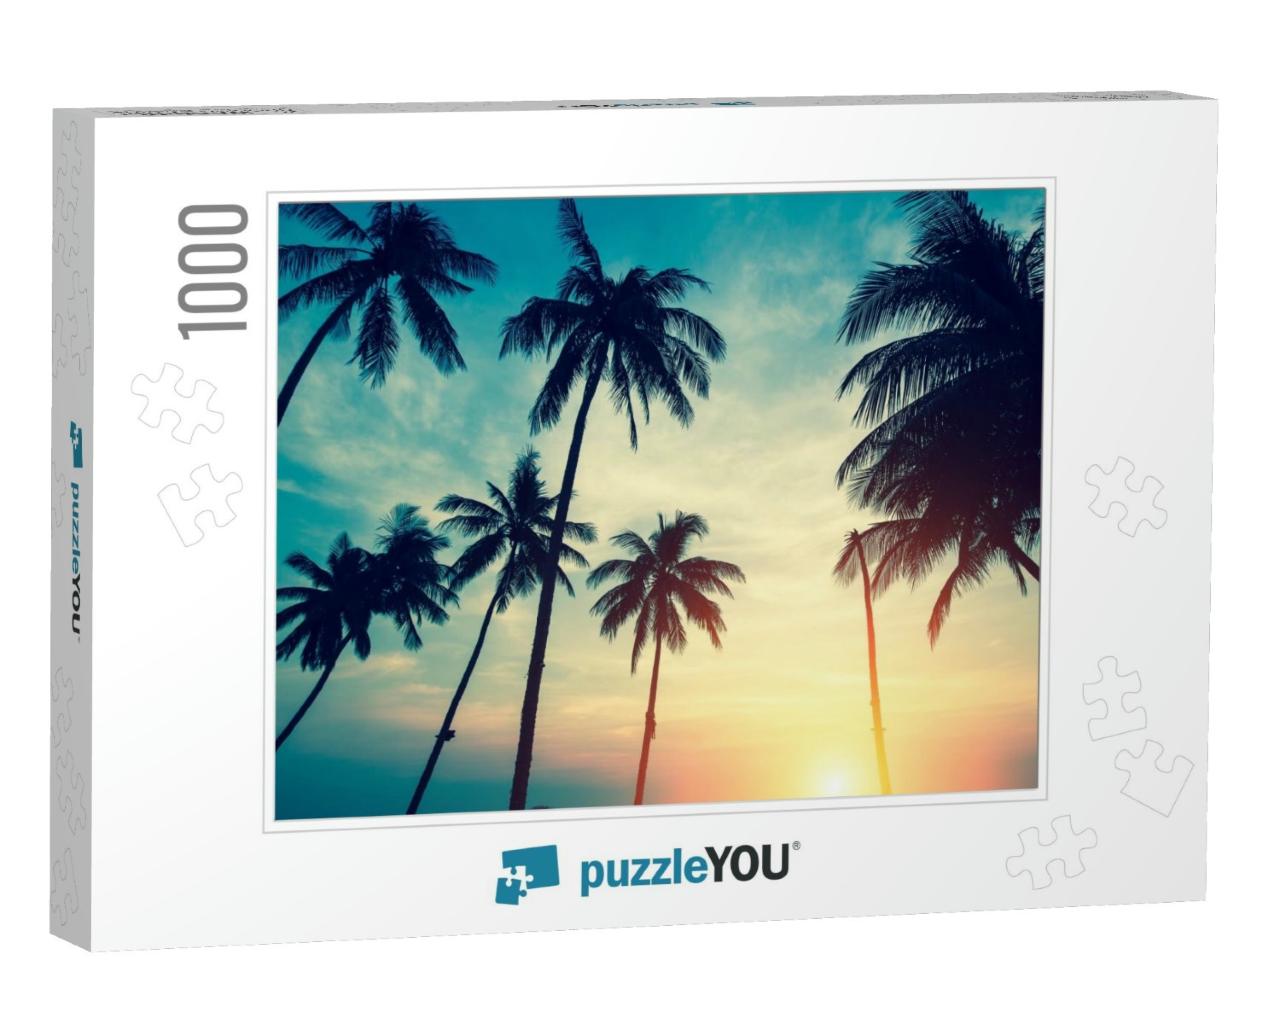 Silhouettes of Palm Trees Against the Sky During a Tropic... Jigsaw Puzzle with 1000 pieces